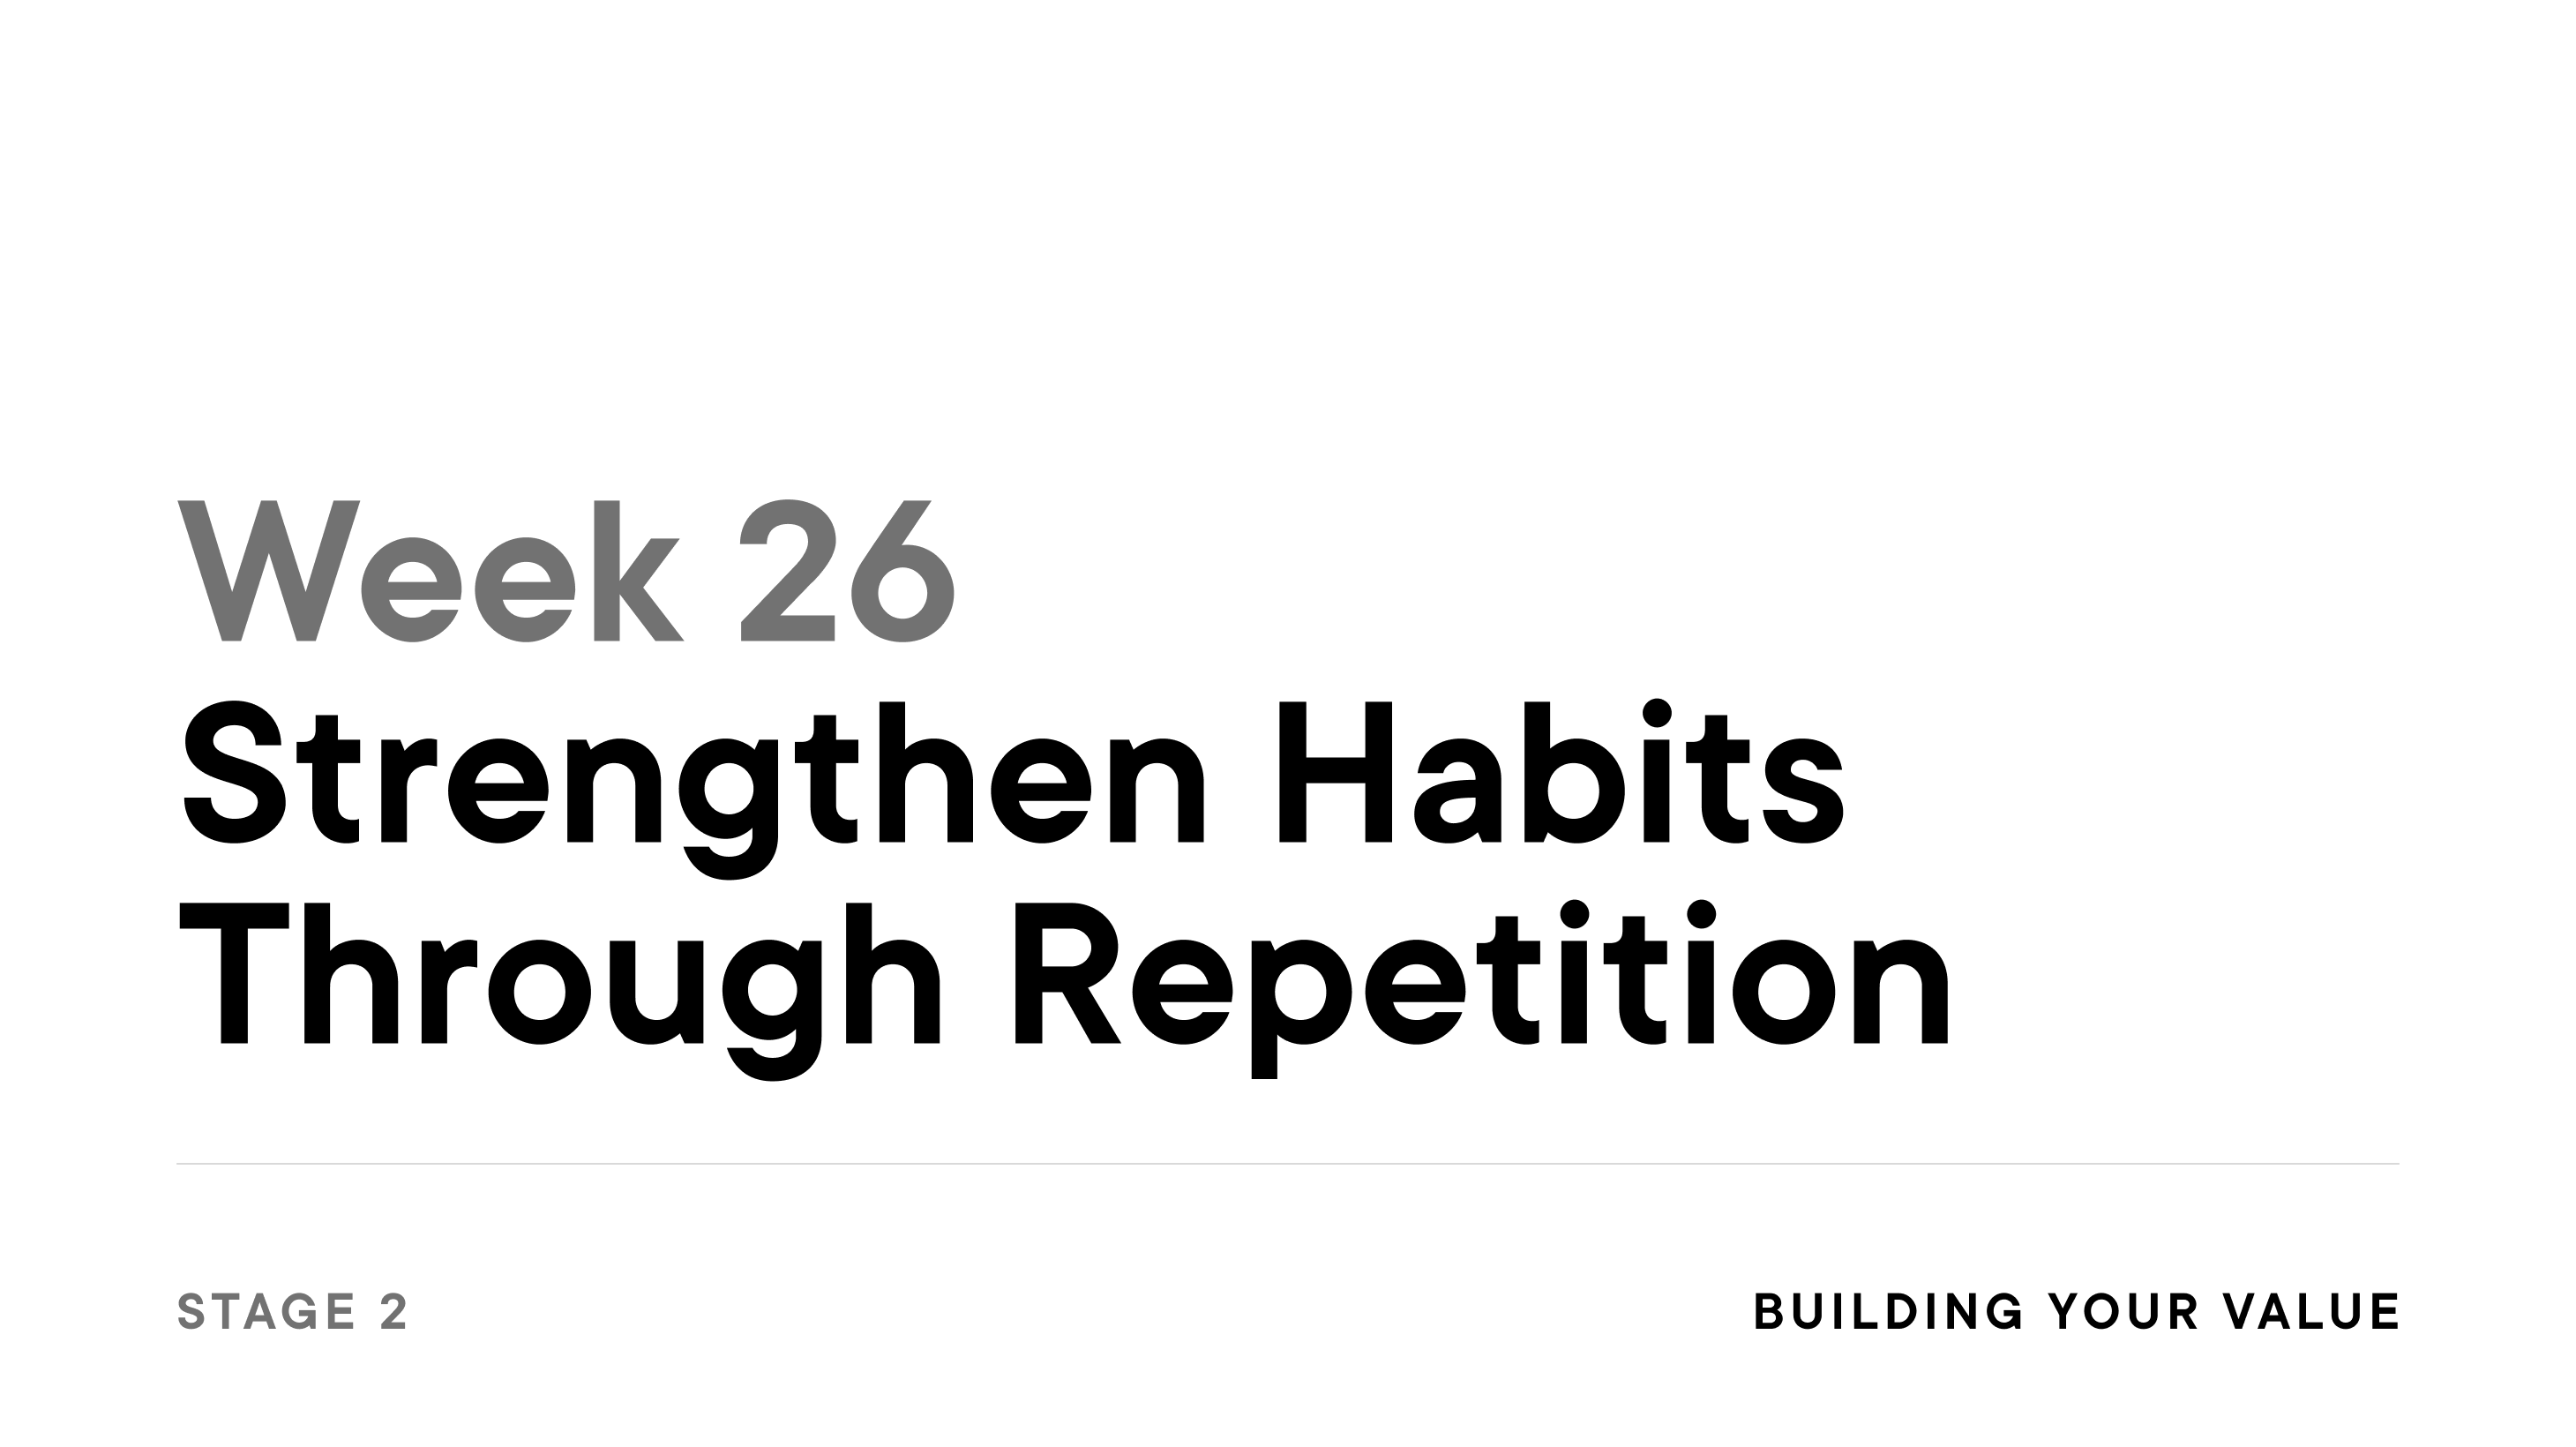 Week 26: Strengthen Habits Through Repetition